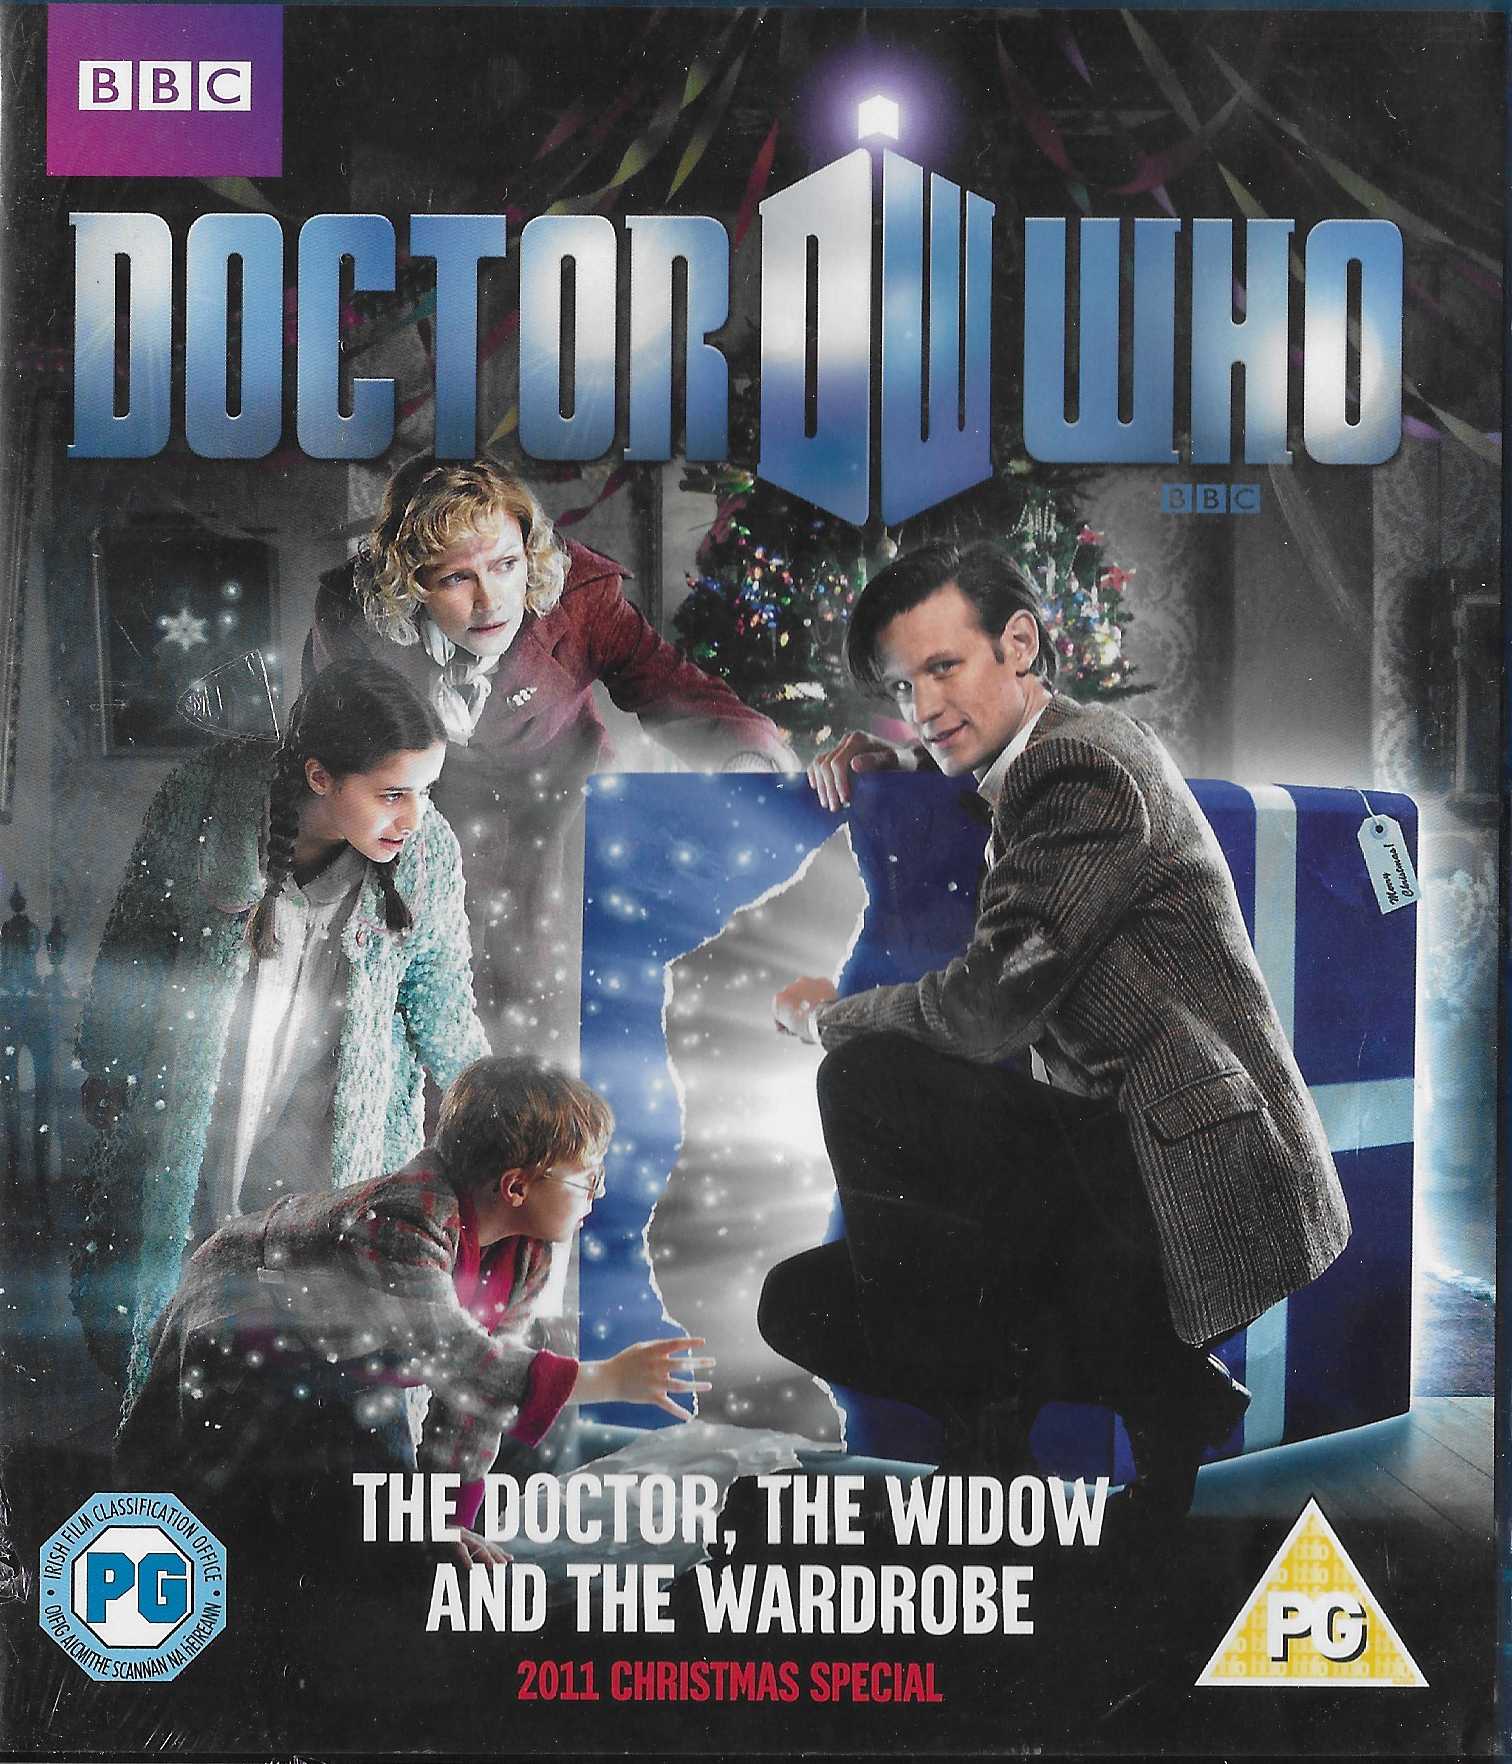 Picture of BBCBD 0171 Doctor Who - The Doctor, the widow and the wardrobe by artist Steven Moffat from the BBC blu-rays - Records and Tapes library